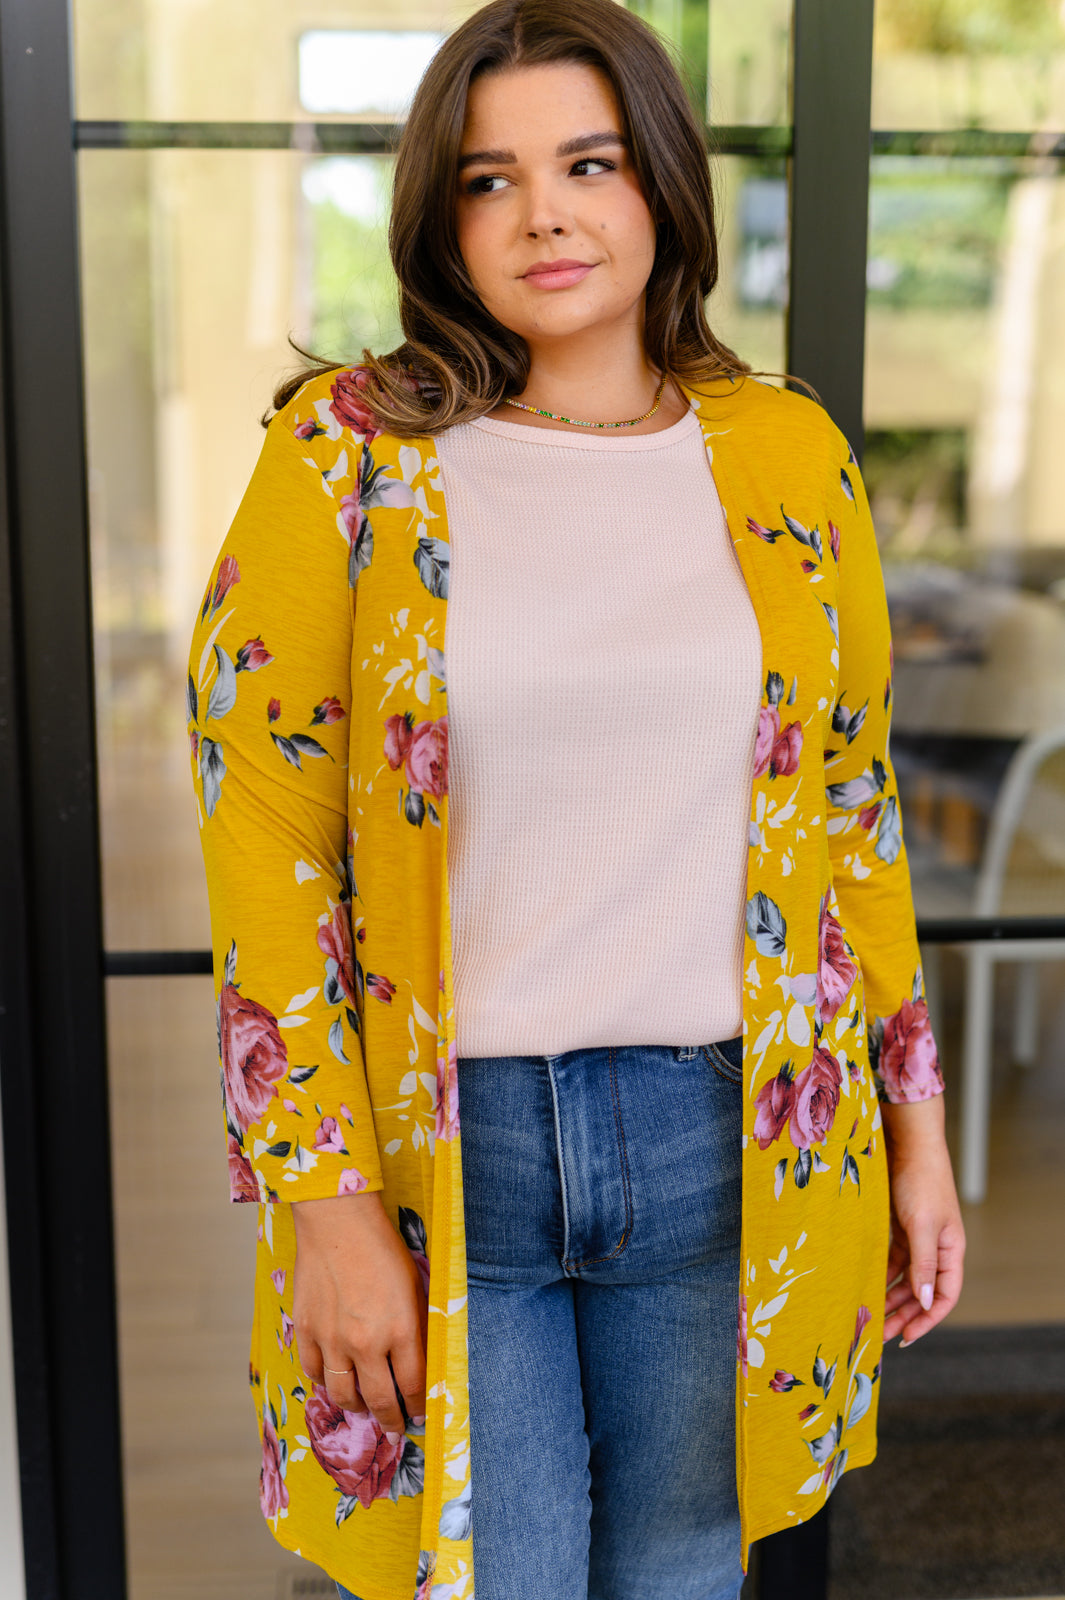 Grow As You Go Floral Cardigan - Dixie Hike & Style